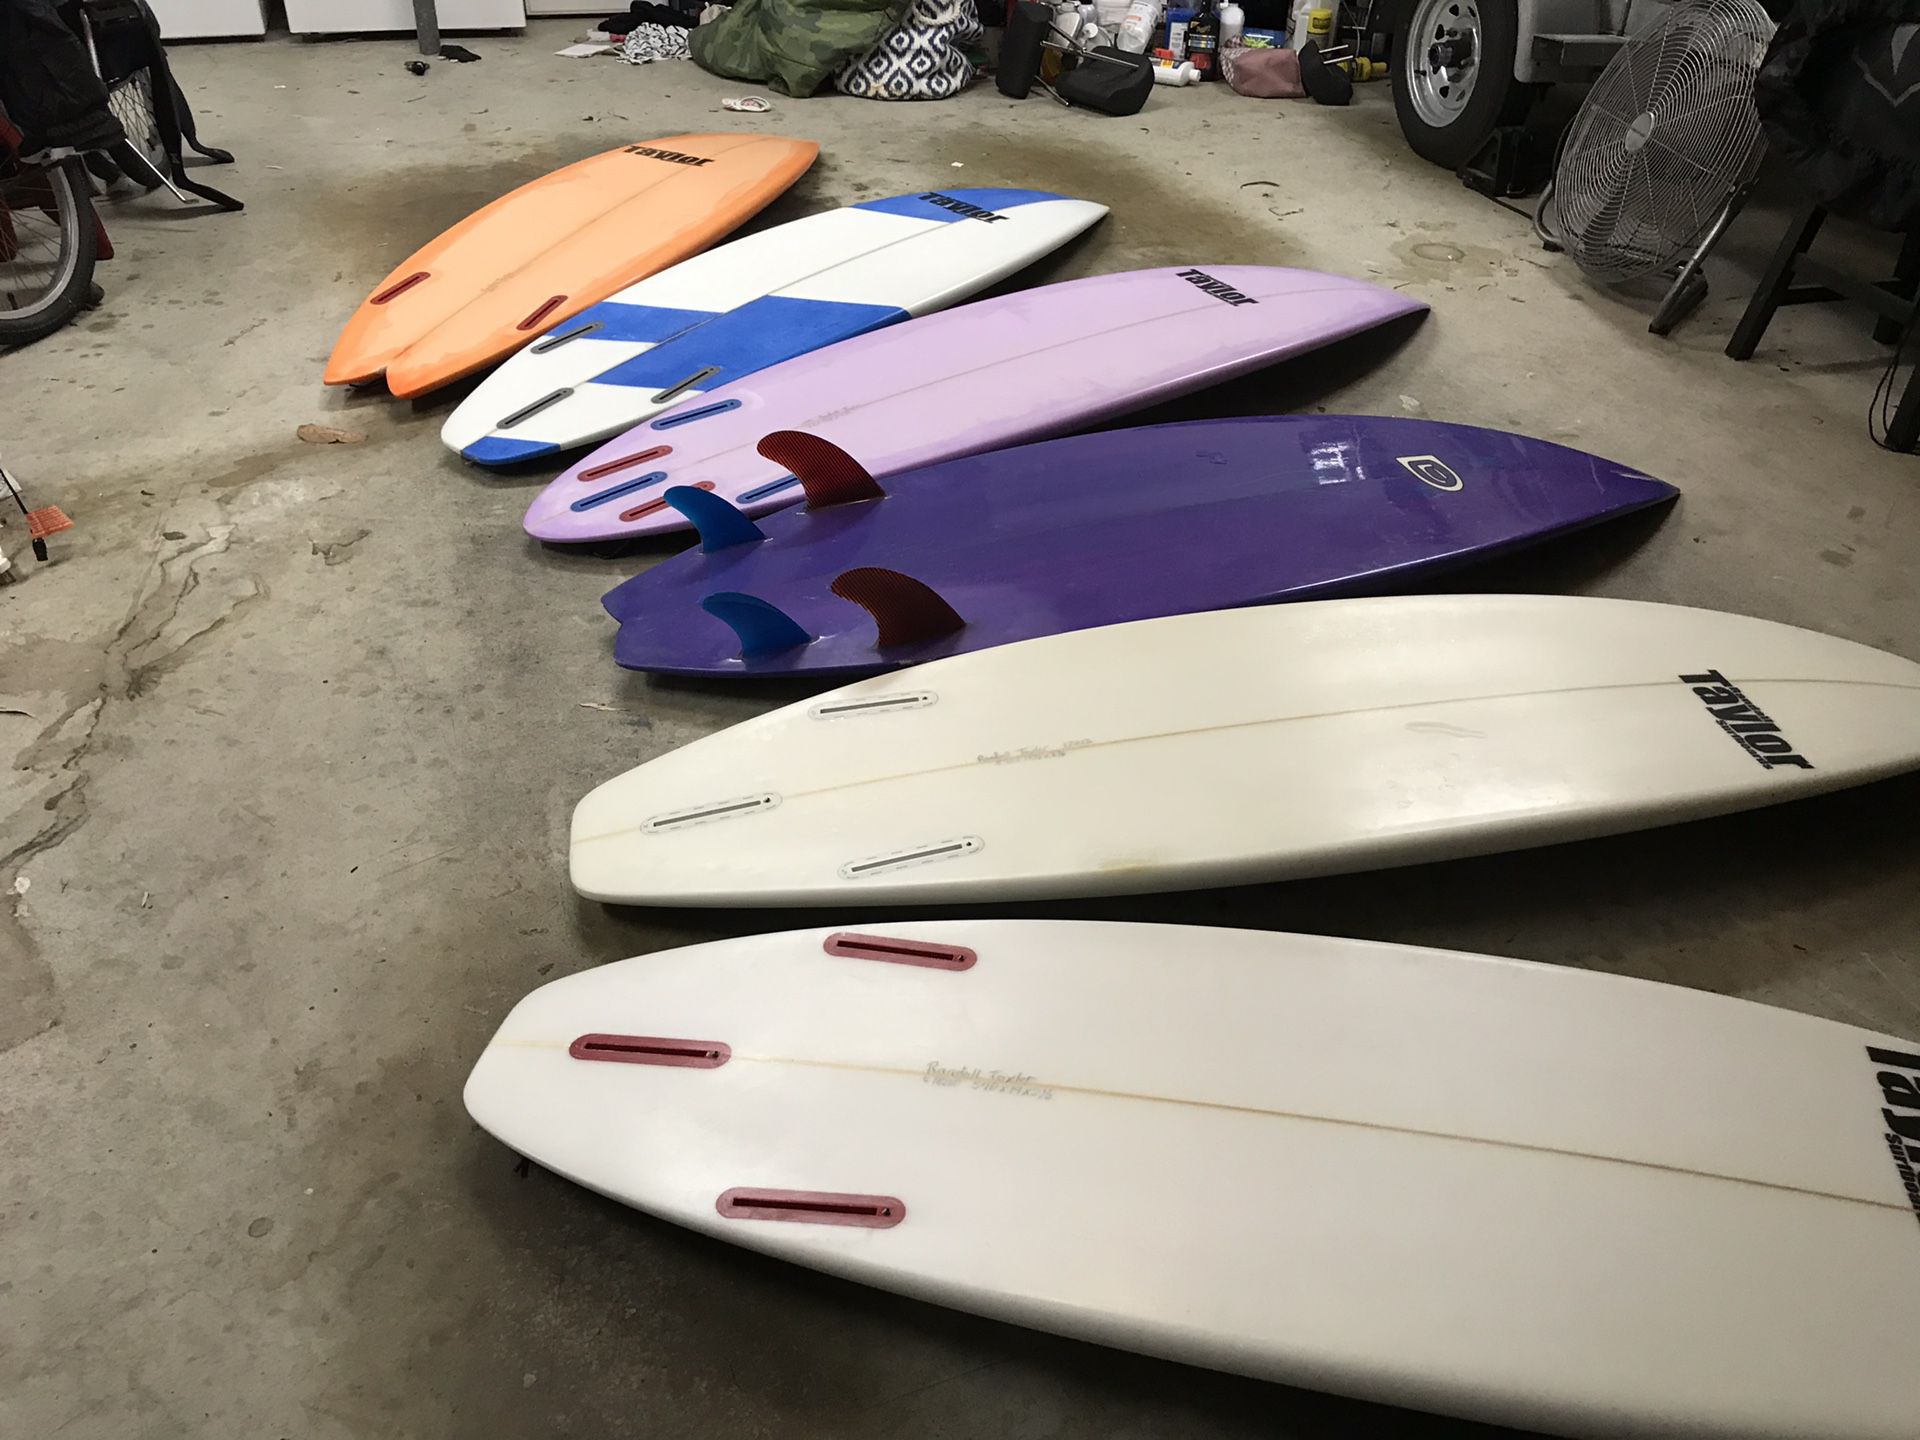 Taylor surfboards. Too many to list.